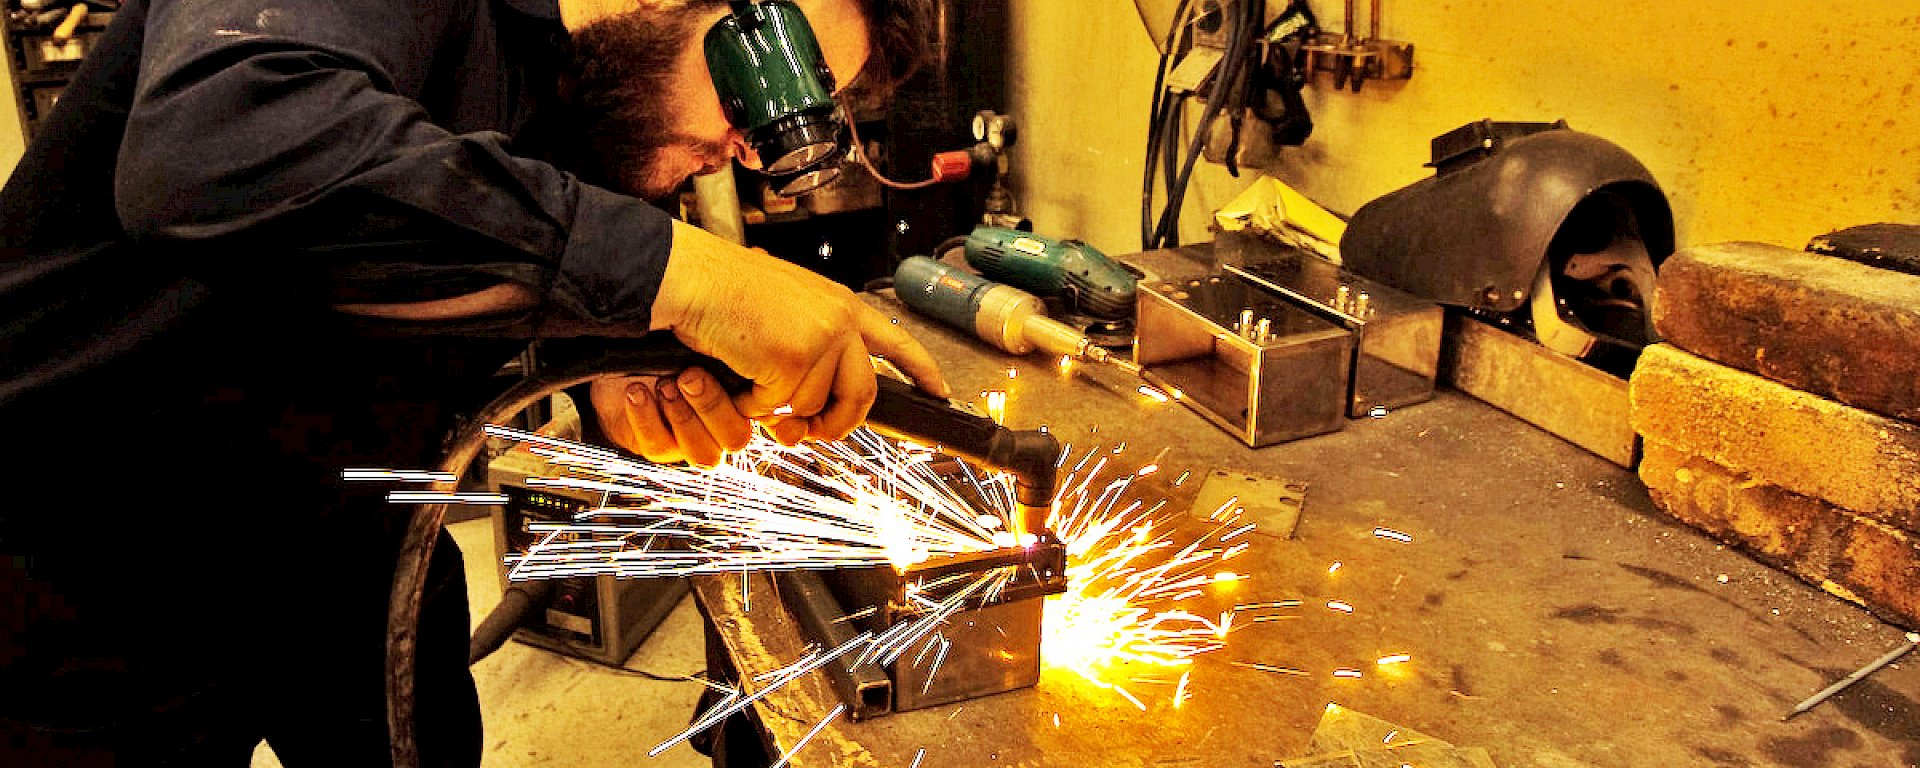 Person welding at a workshop bench wearing goggles.